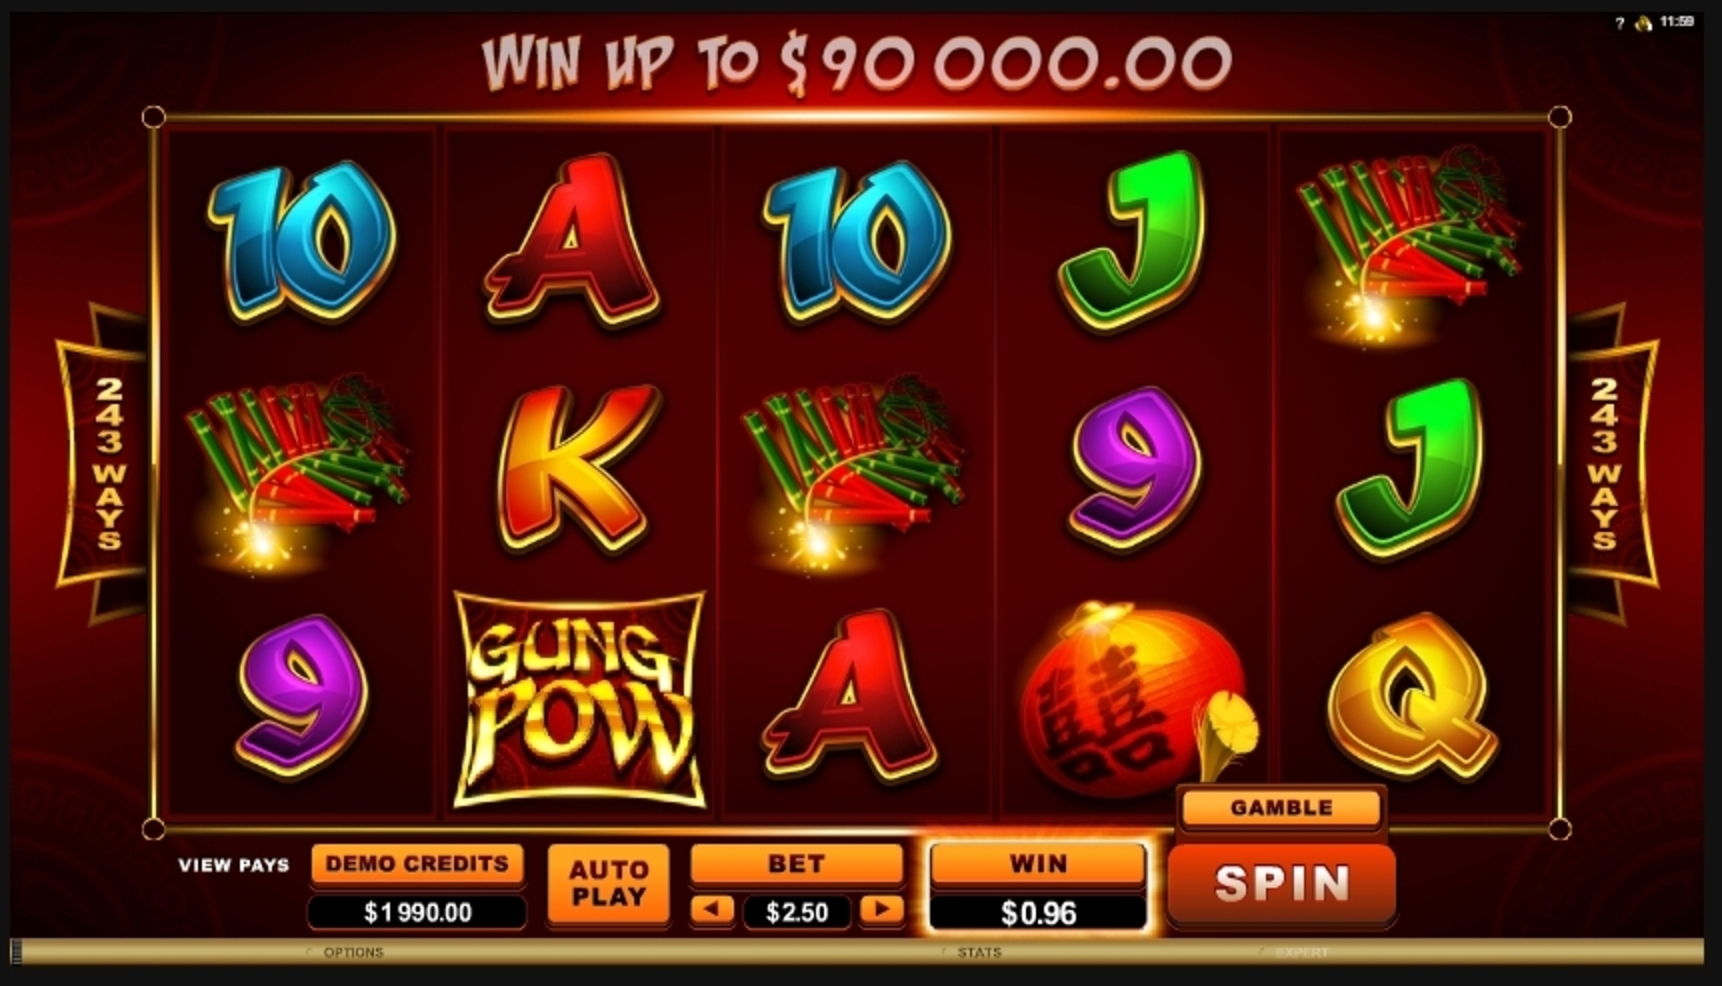 Win Money in Gung Pow Free Slot Game by Microgaming